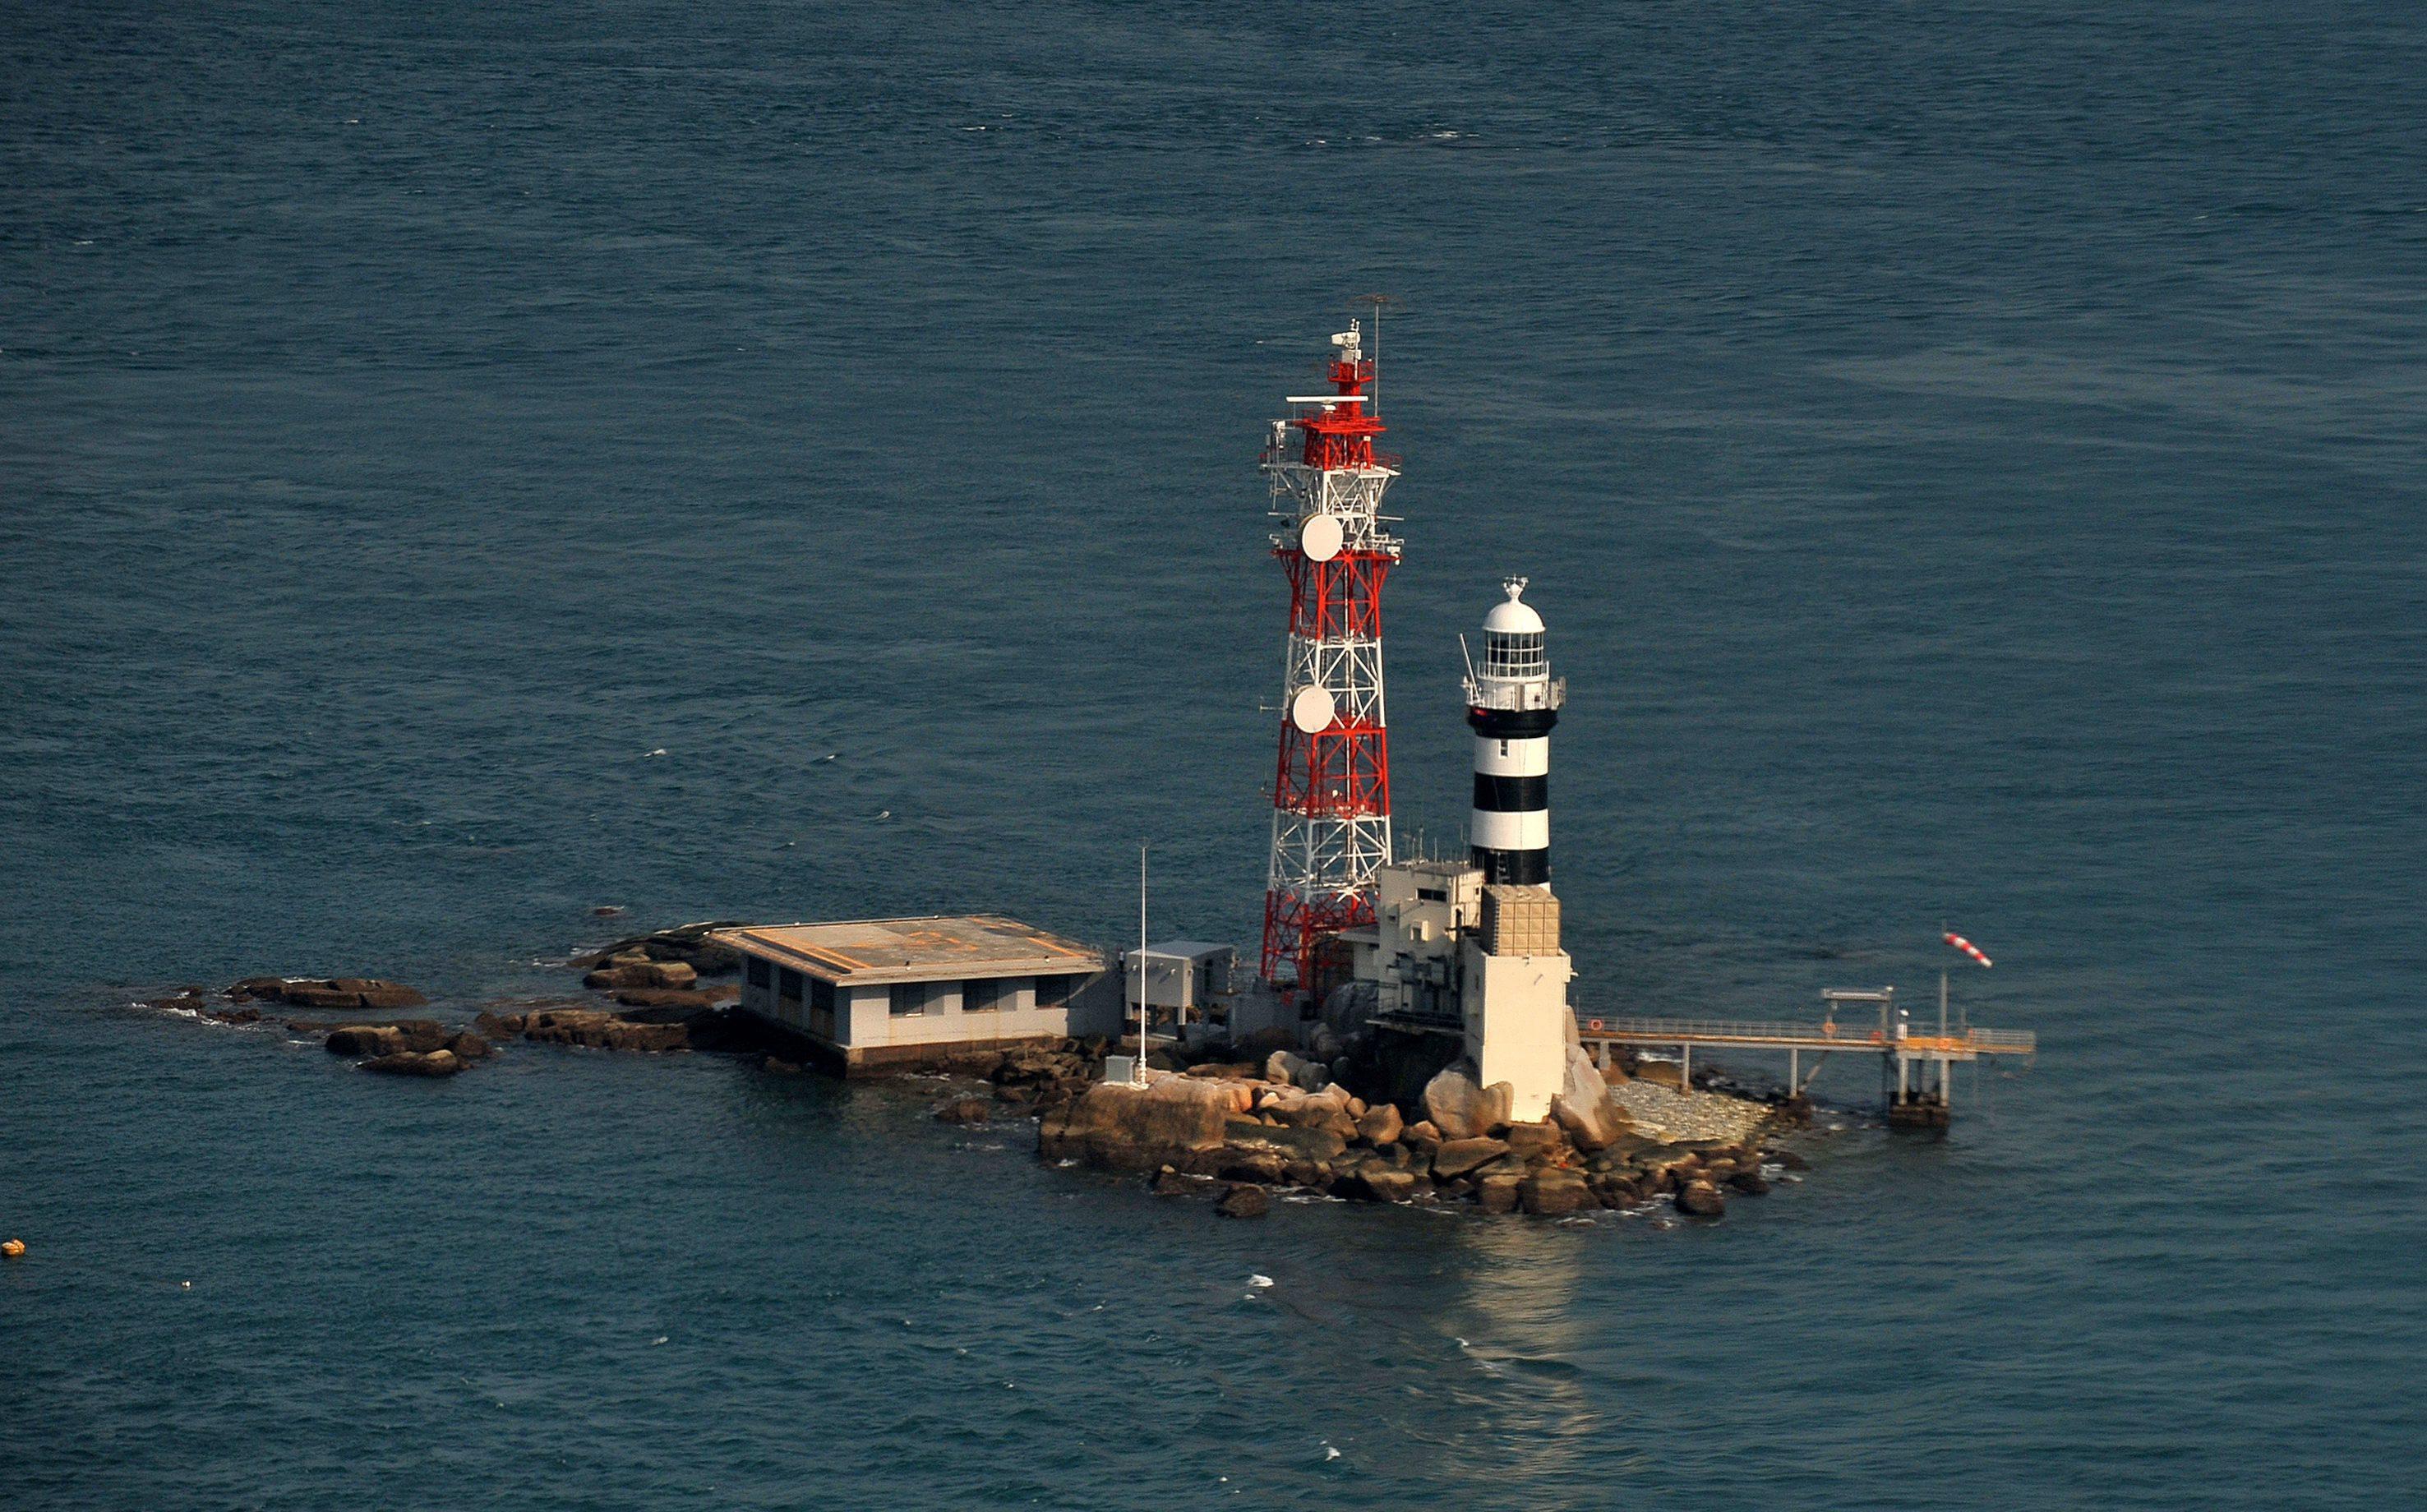 The Horsburgh lighthouse on Pedra Branca Island, around 46km off the eastern coast of Singapore, on November 10, 2011. The International Court of Justice’s approach to resolving Singapore and Malaysia’s claims over Pedra Branca could be used to resolve the competing claims in the South China Sea. Photo: EPA